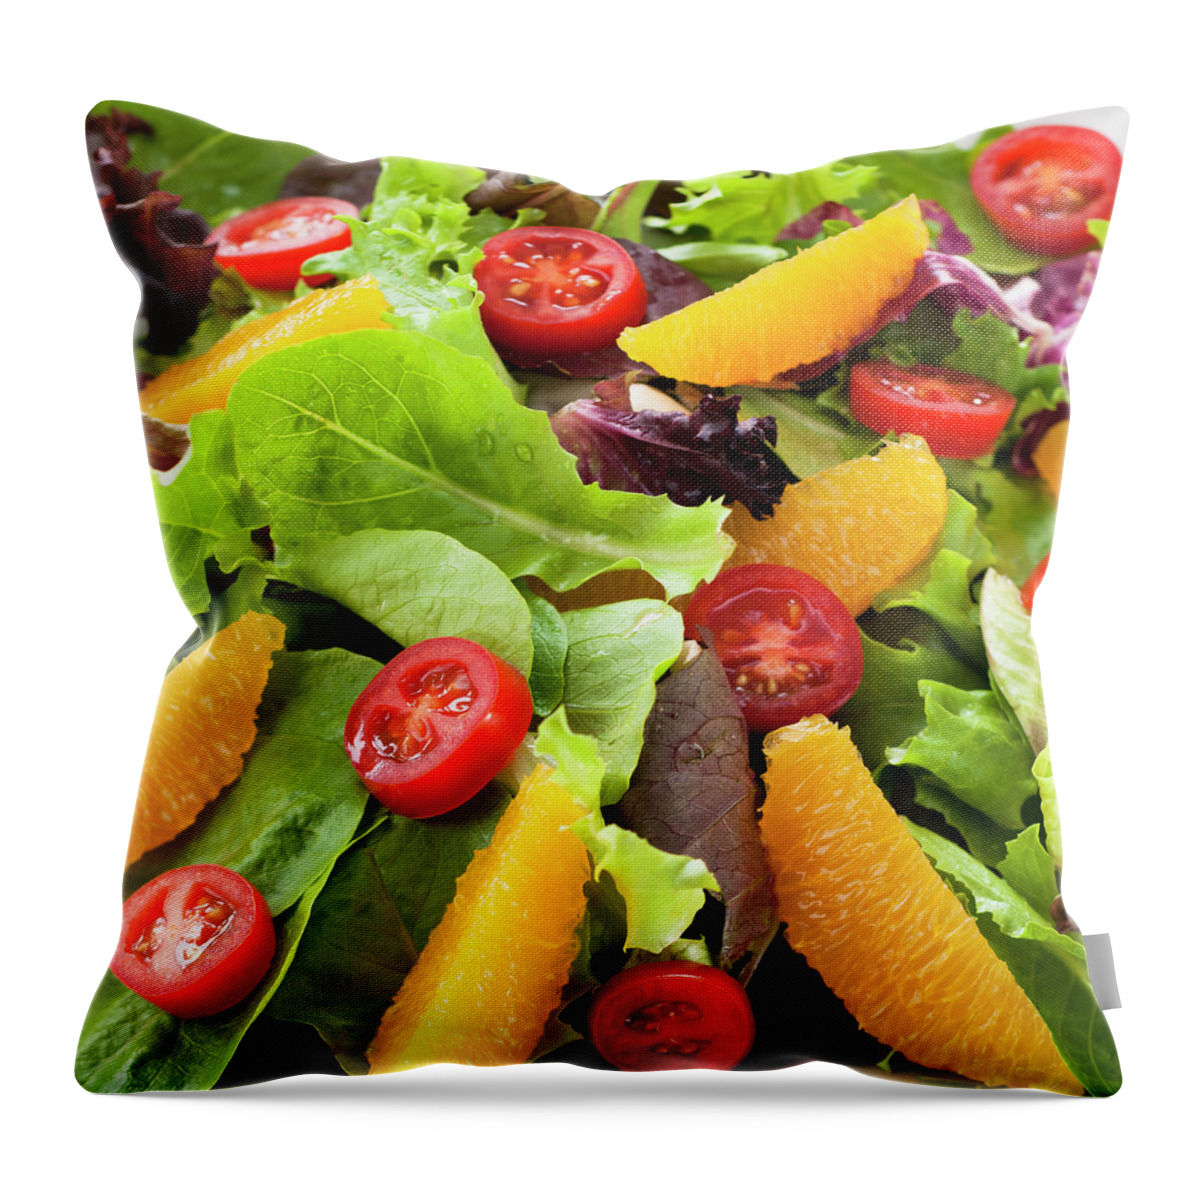 Orange Color Throw Pillow featuring the photograph Fresh Salad On Plate by Tetra Images